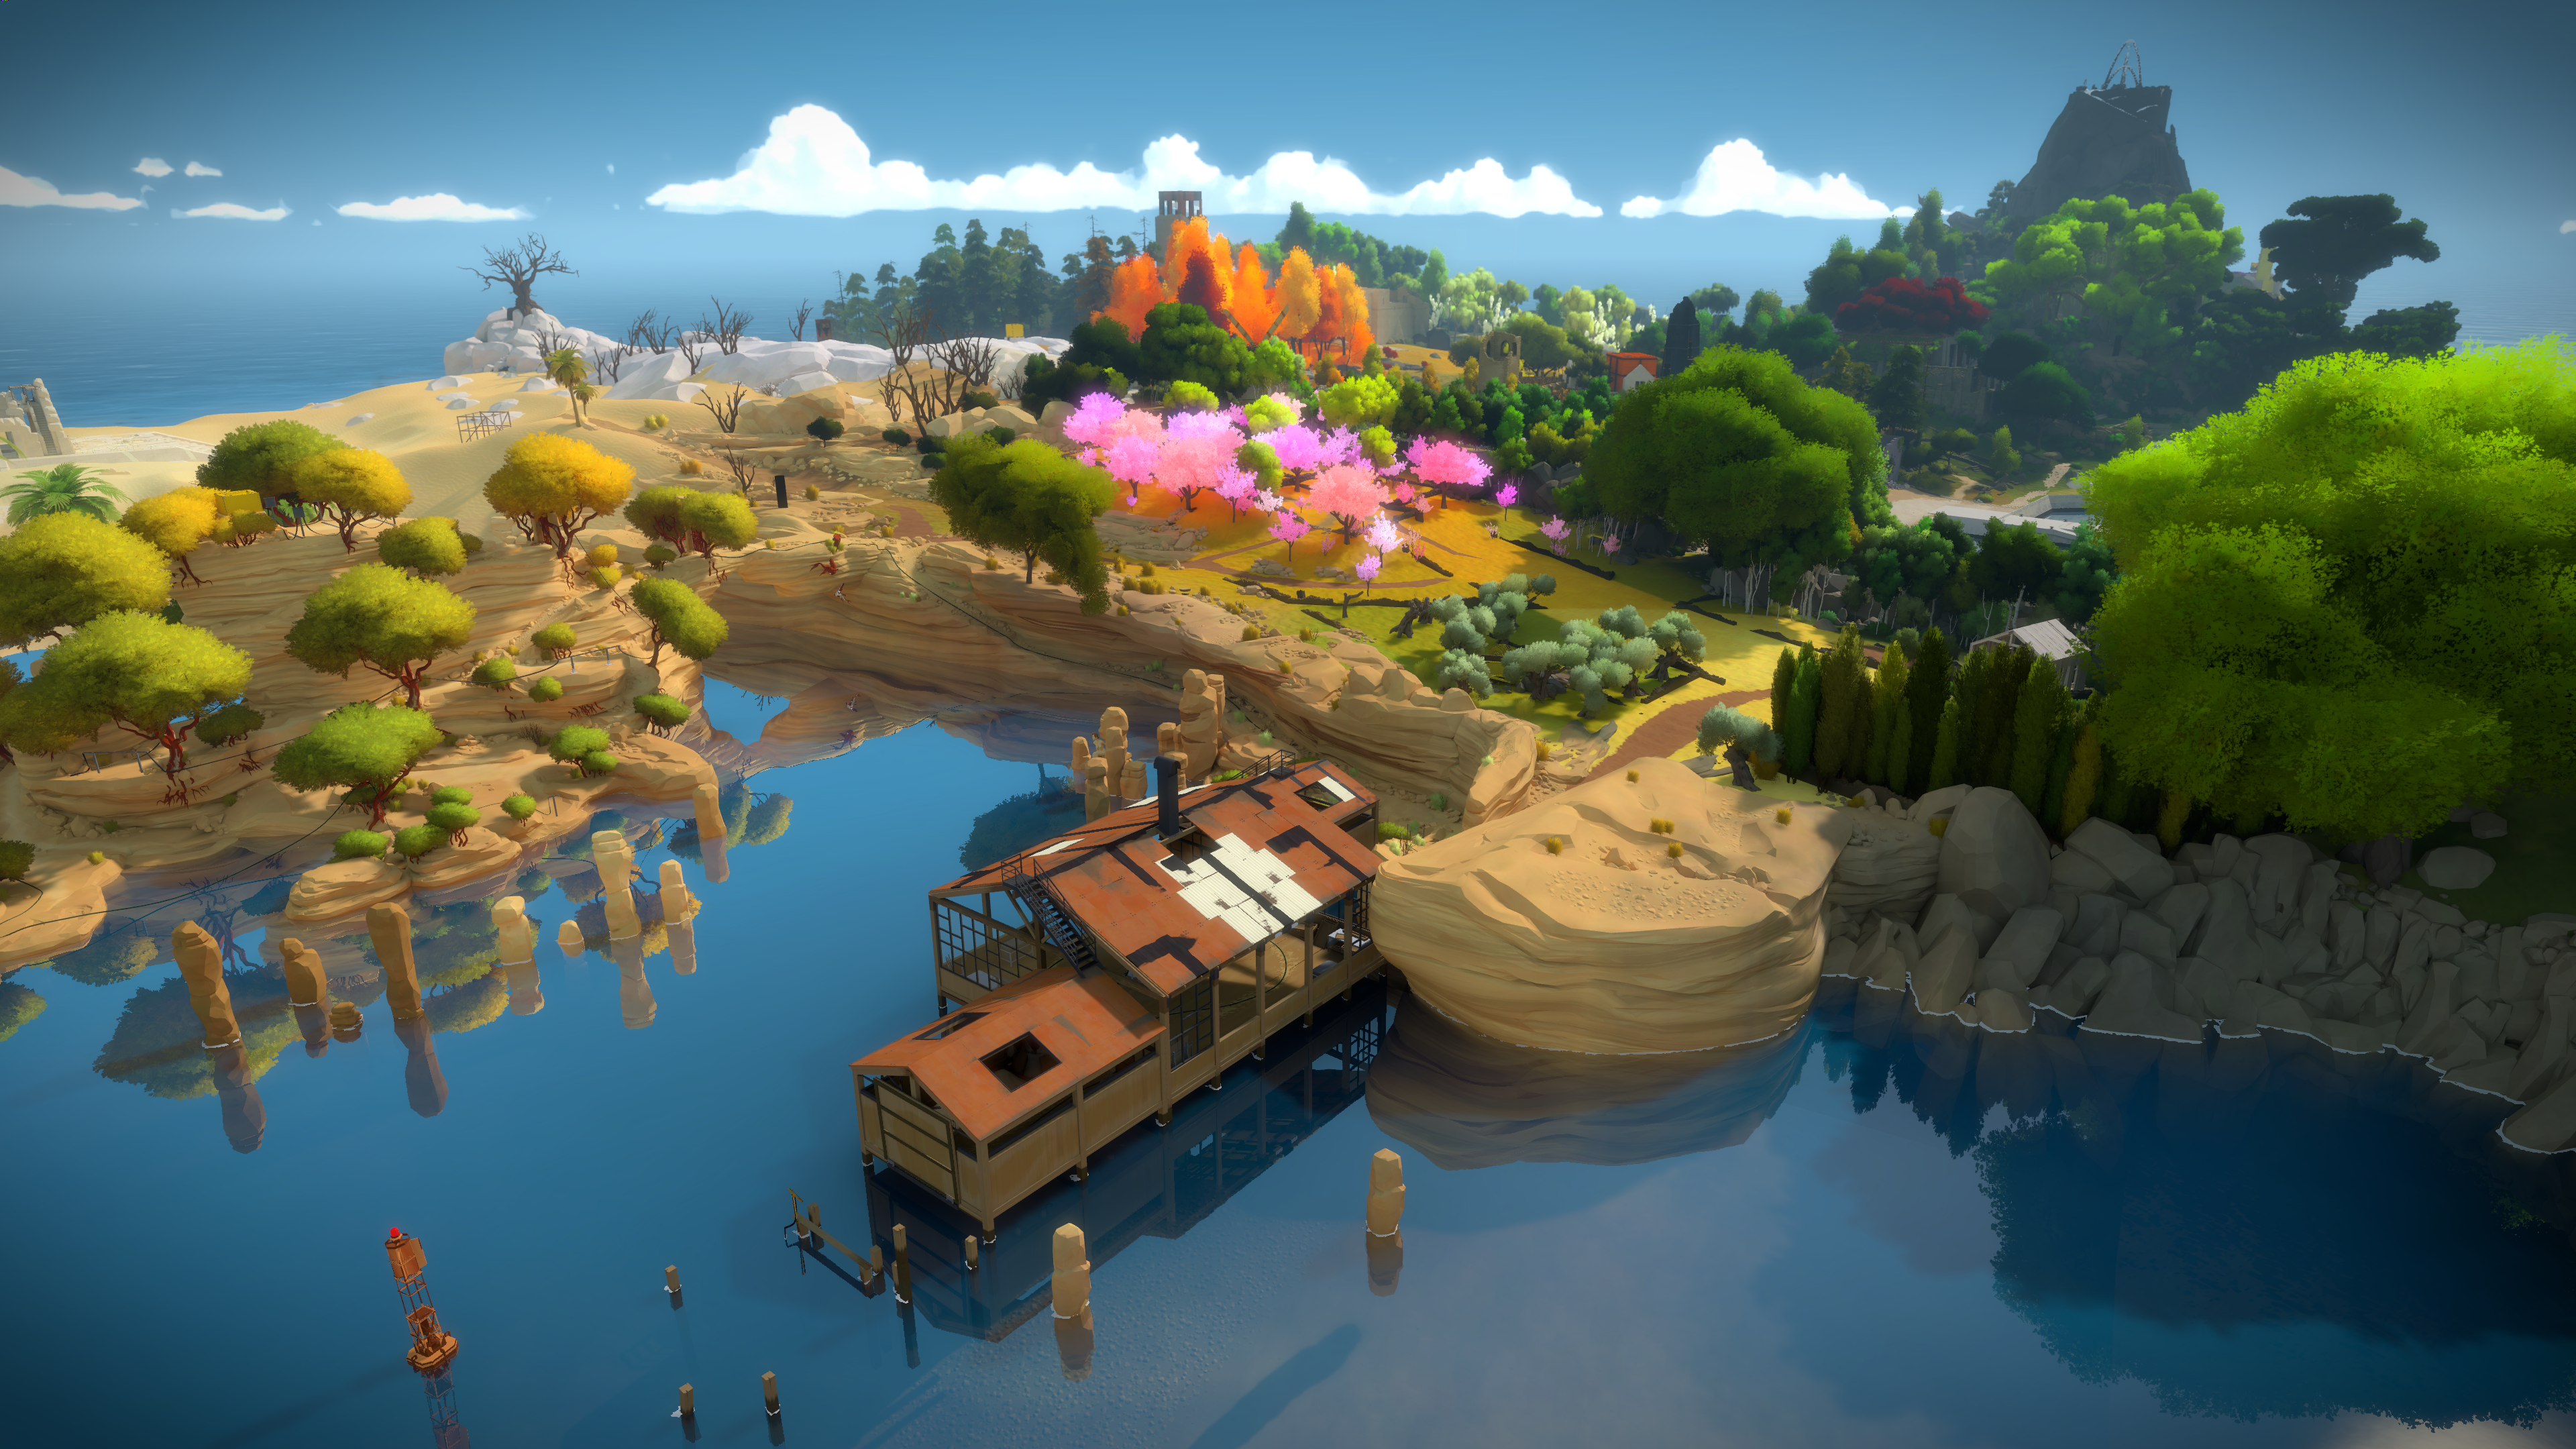 Video Game The Witness 3840x2160